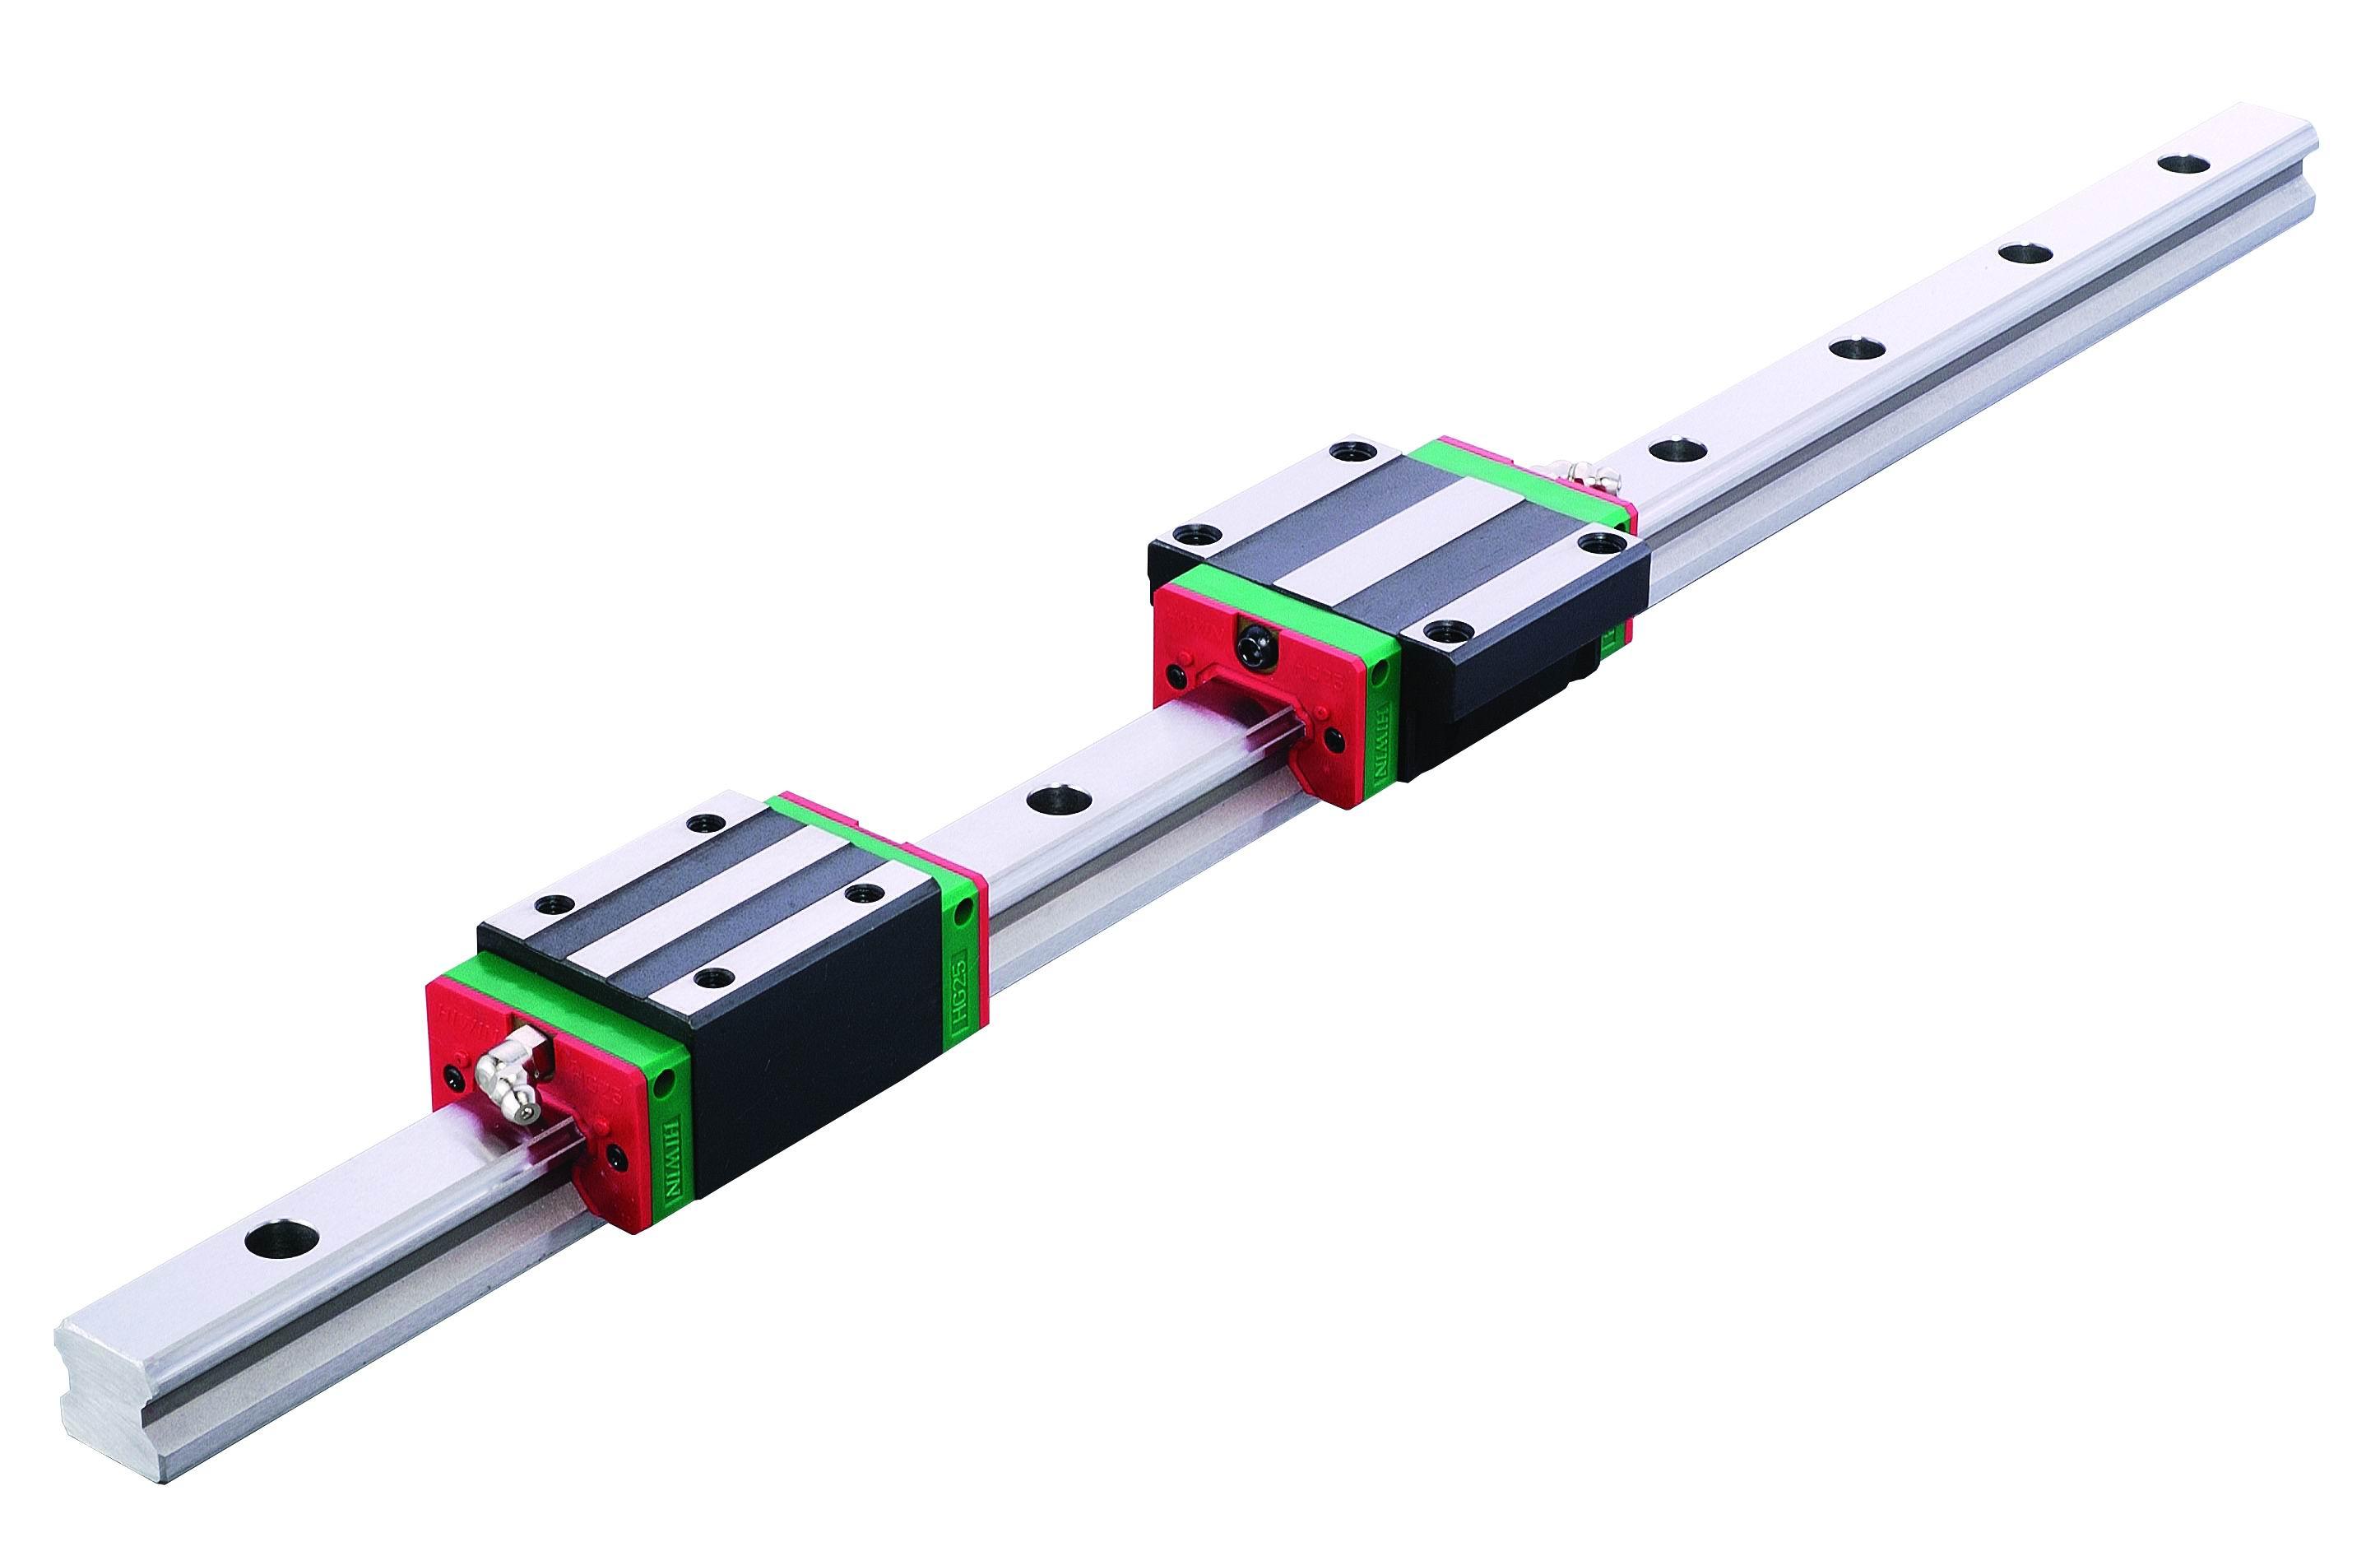 Advantages and characteristics of HIWIN linear guide rail